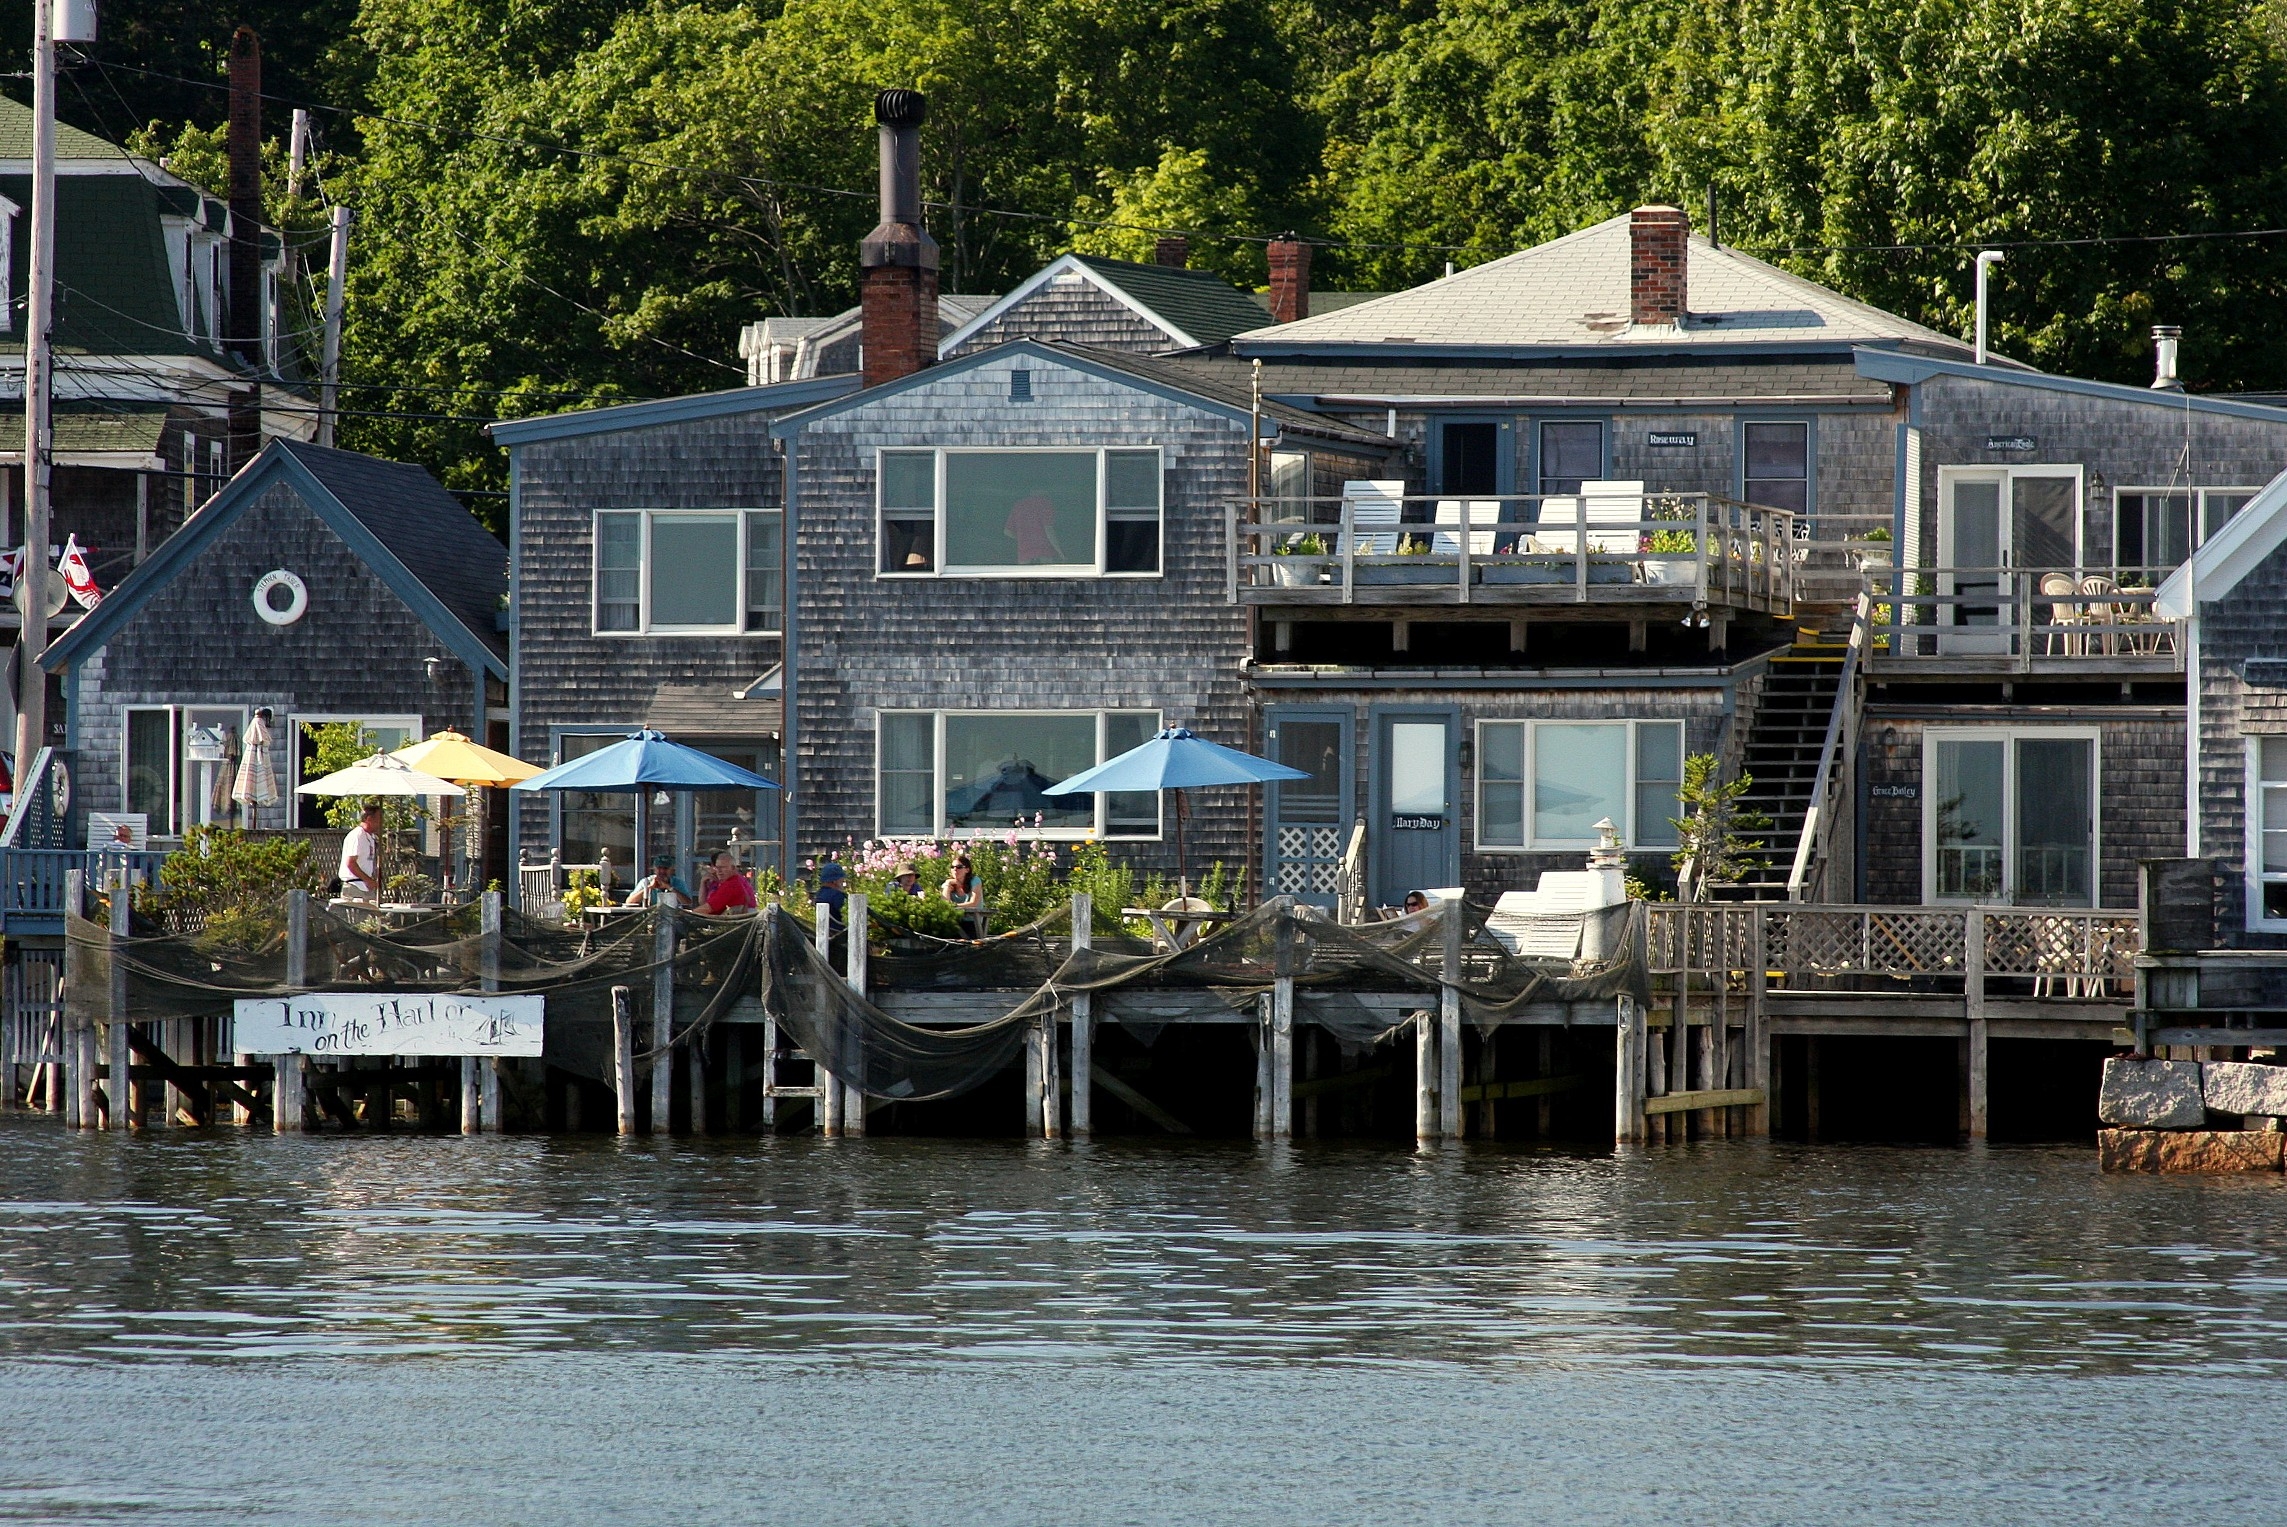 Inn on the Harbor - A Lobster Lover's Dream Stay - Lobster Trail